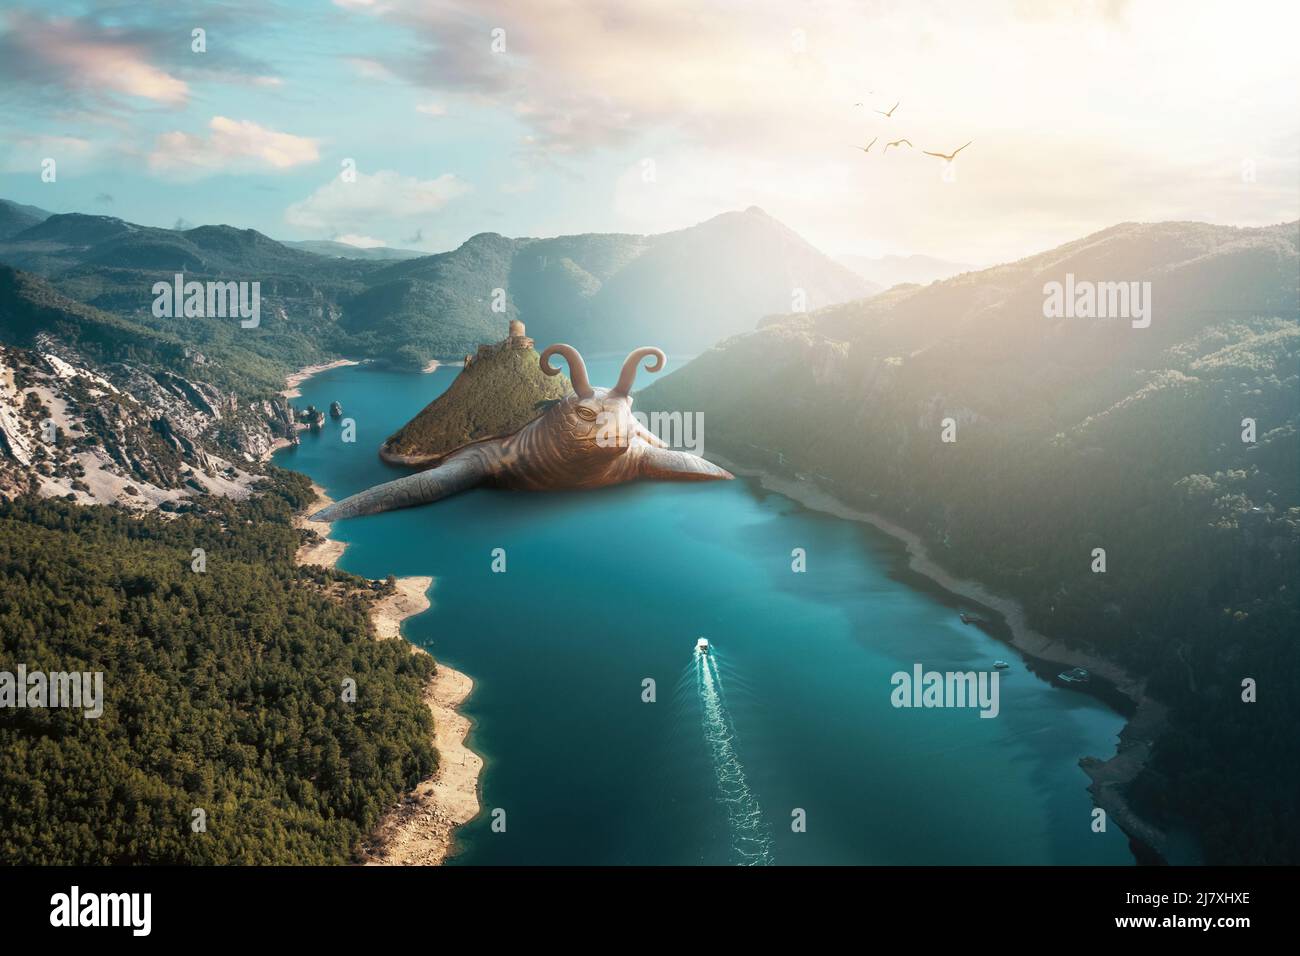 A giant sea turtleis swiming in a potemic between mountains. Unrealistic fantasy and nature concept. High quality photo Stock Photo